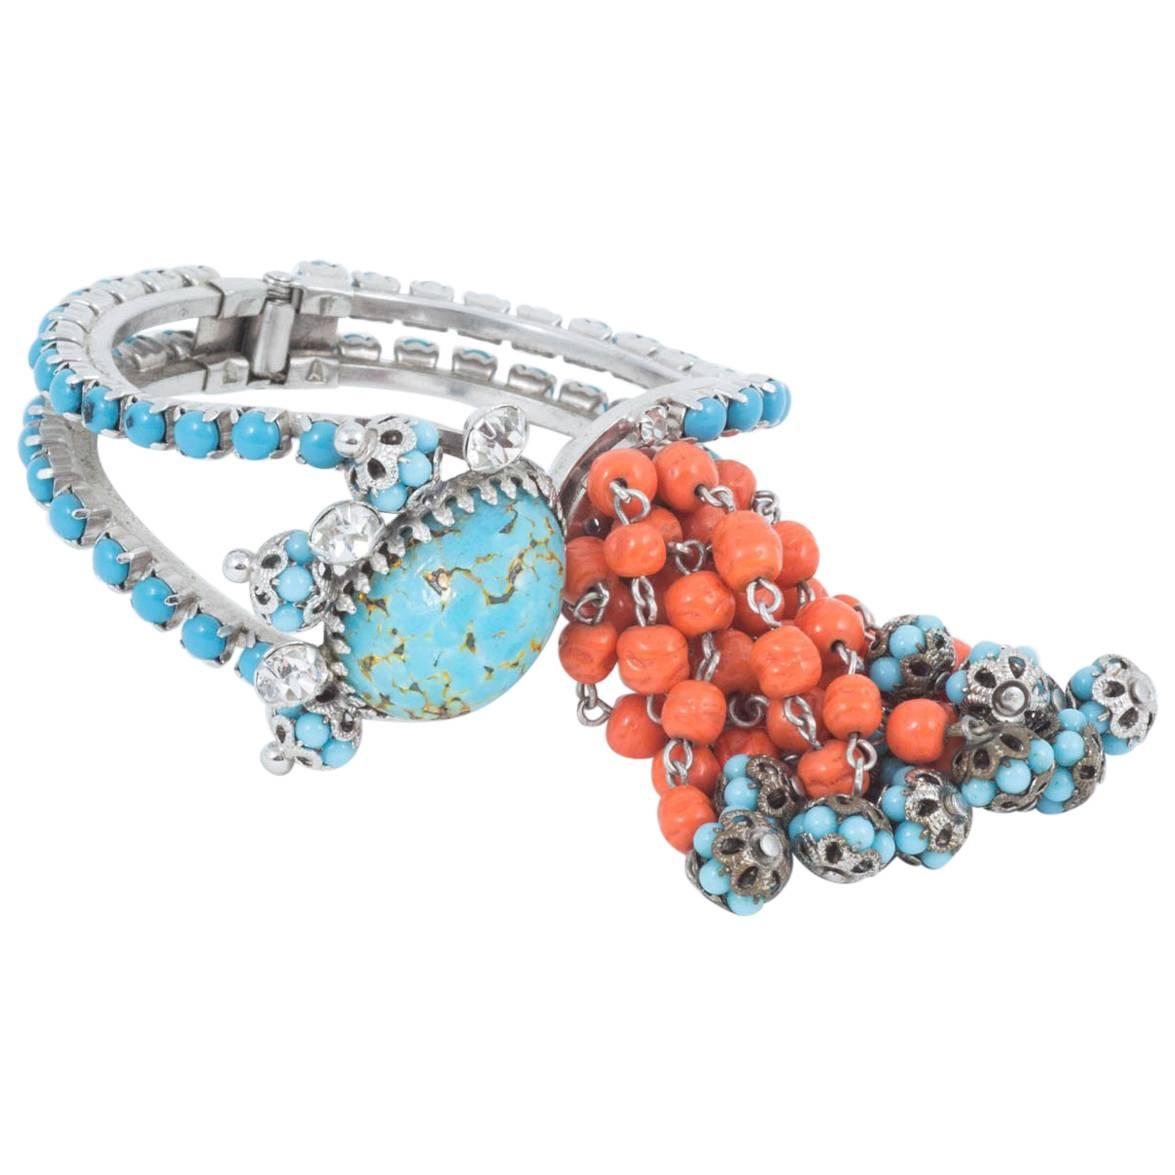  Prong set silvertone, turquoise and coral glass clamper 'cha cha' bracelet 1950s